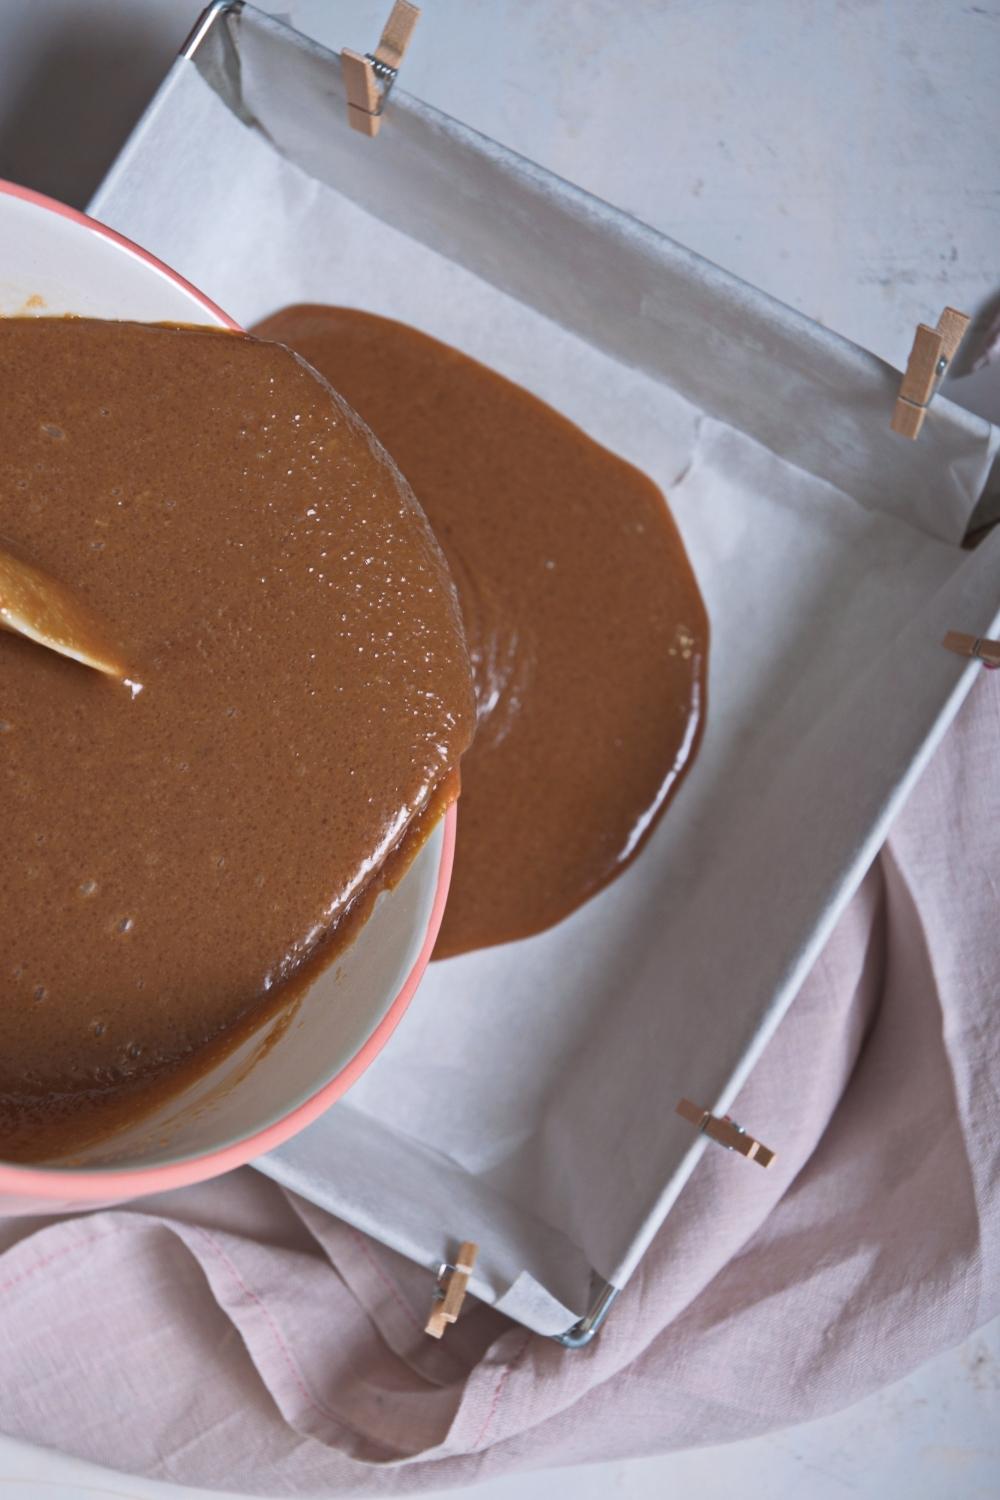 An overhead view of a bowl containing melted caramel fudge ingredients being poured into a parchment paper lined square pan.